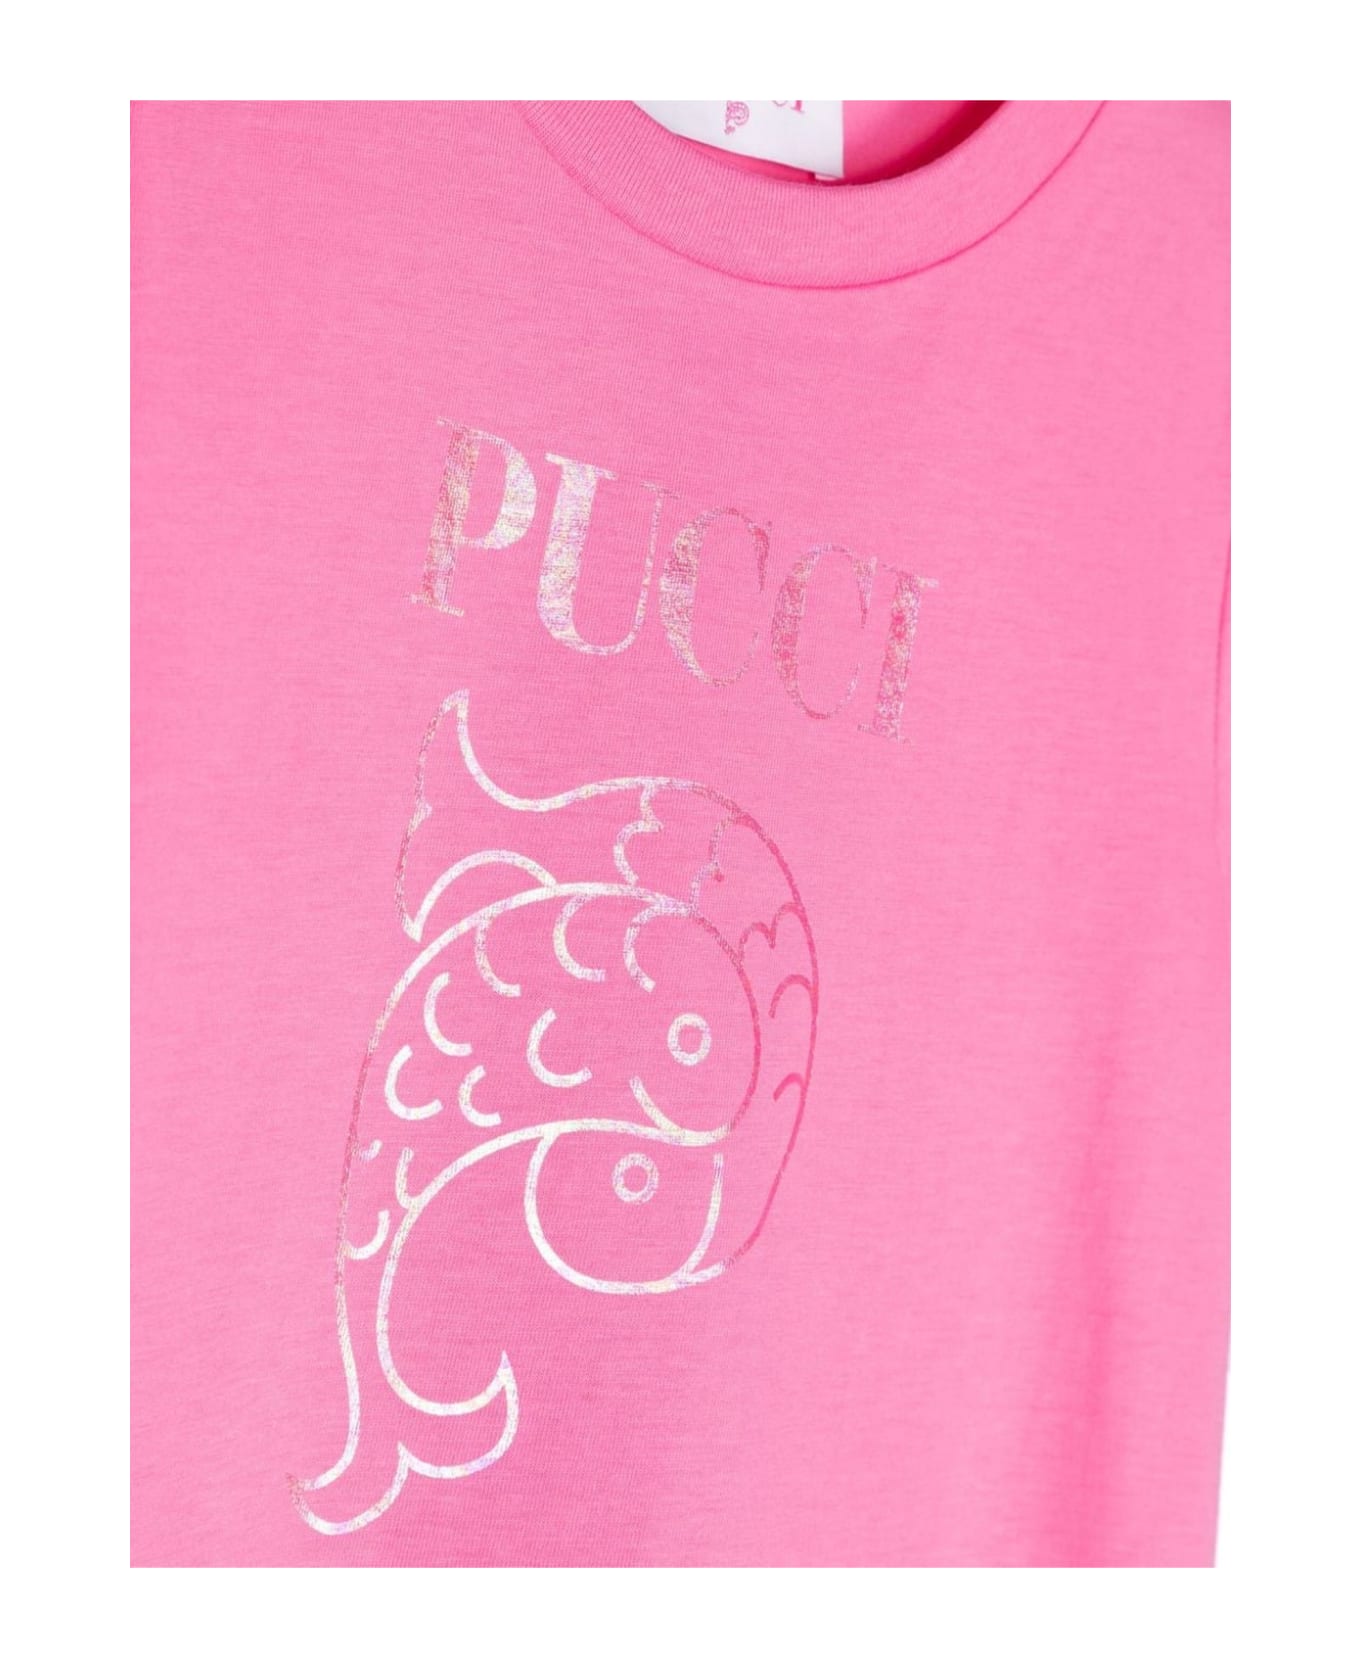 Pucci Emilio Pucci T-shirts And Polos Pink - Pink